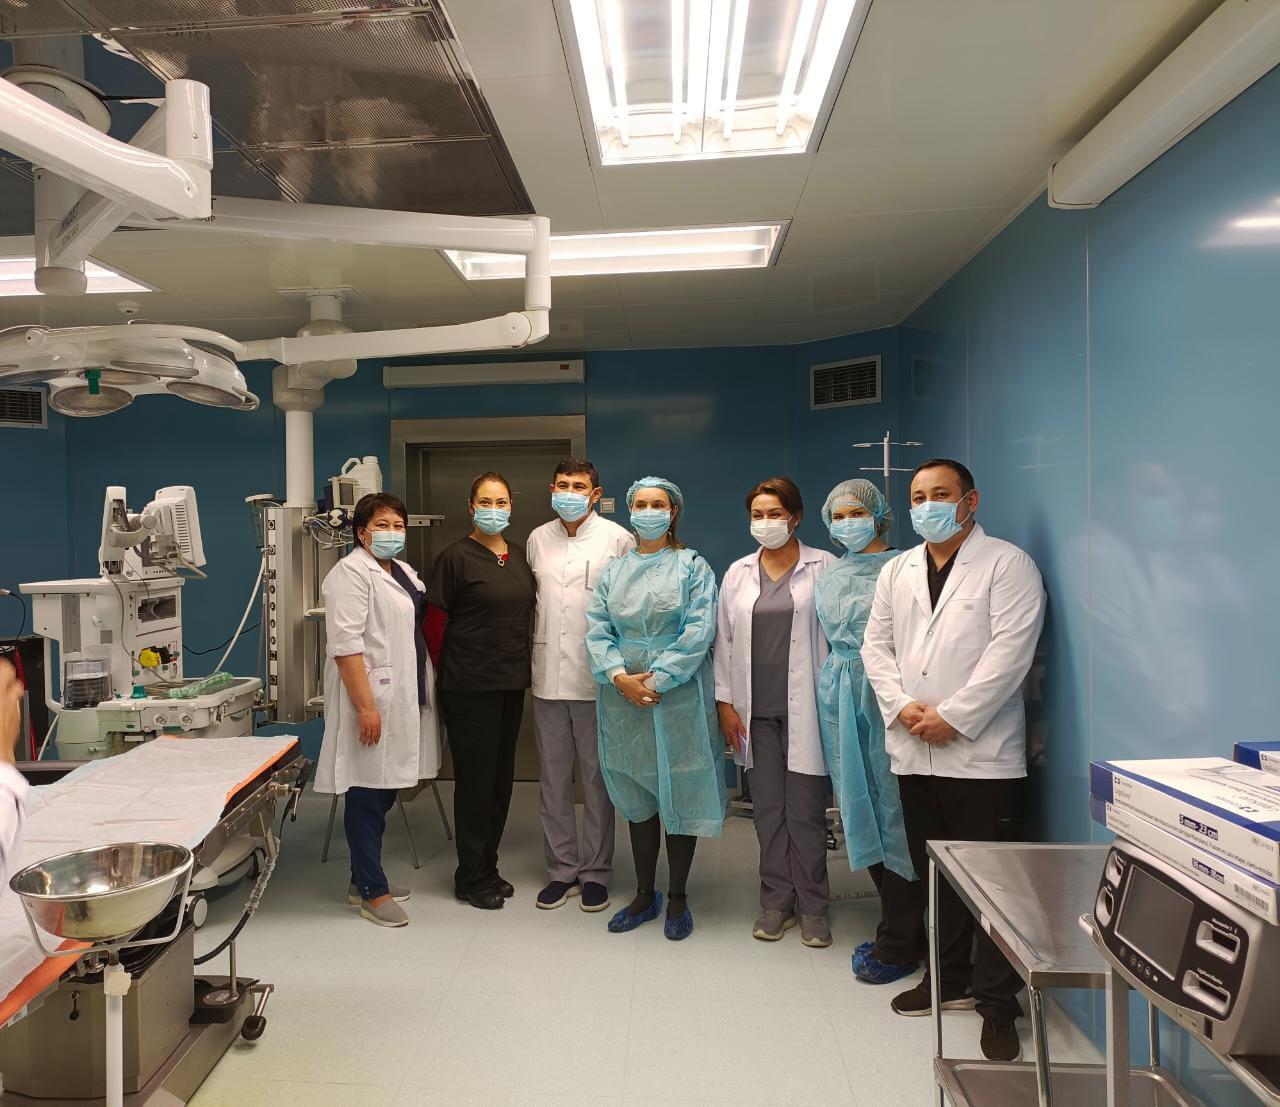 On 28 October 2022 the EU CBRN CoE Project 87 Chemical safety and security expert Ms. Raquel-Duarte Davidson visited Almaty Emergency Hospital